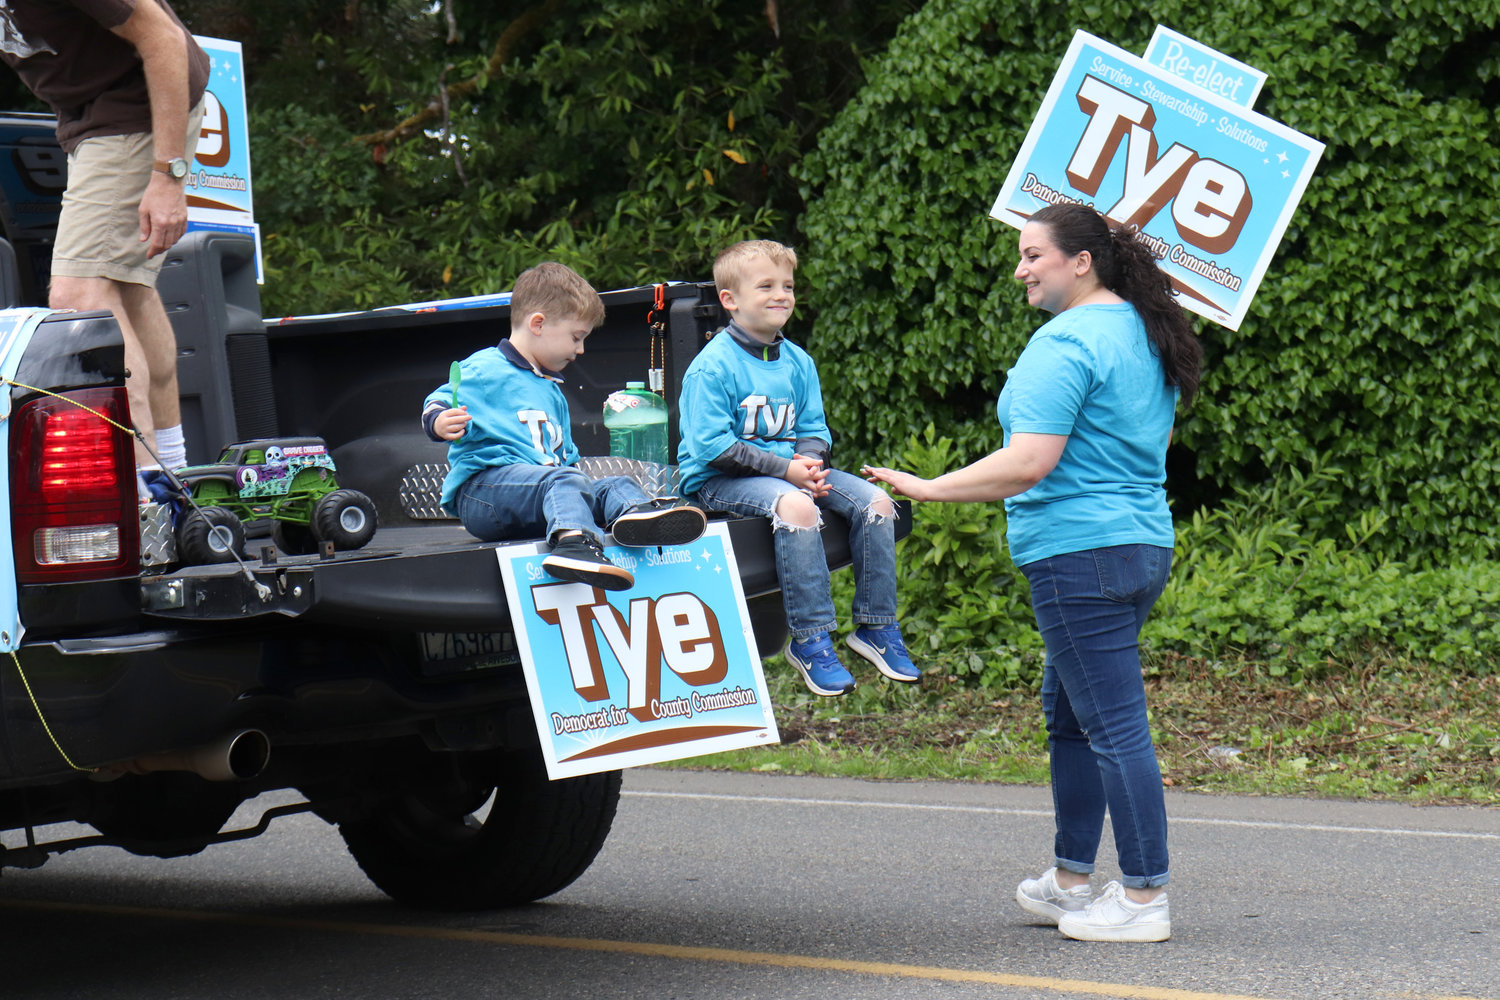 Children ride the back of a float promoting Thurston County Commissioner Tye Menser’s re-election campaign during the Swede Day Parade in Rochester on Saturday.